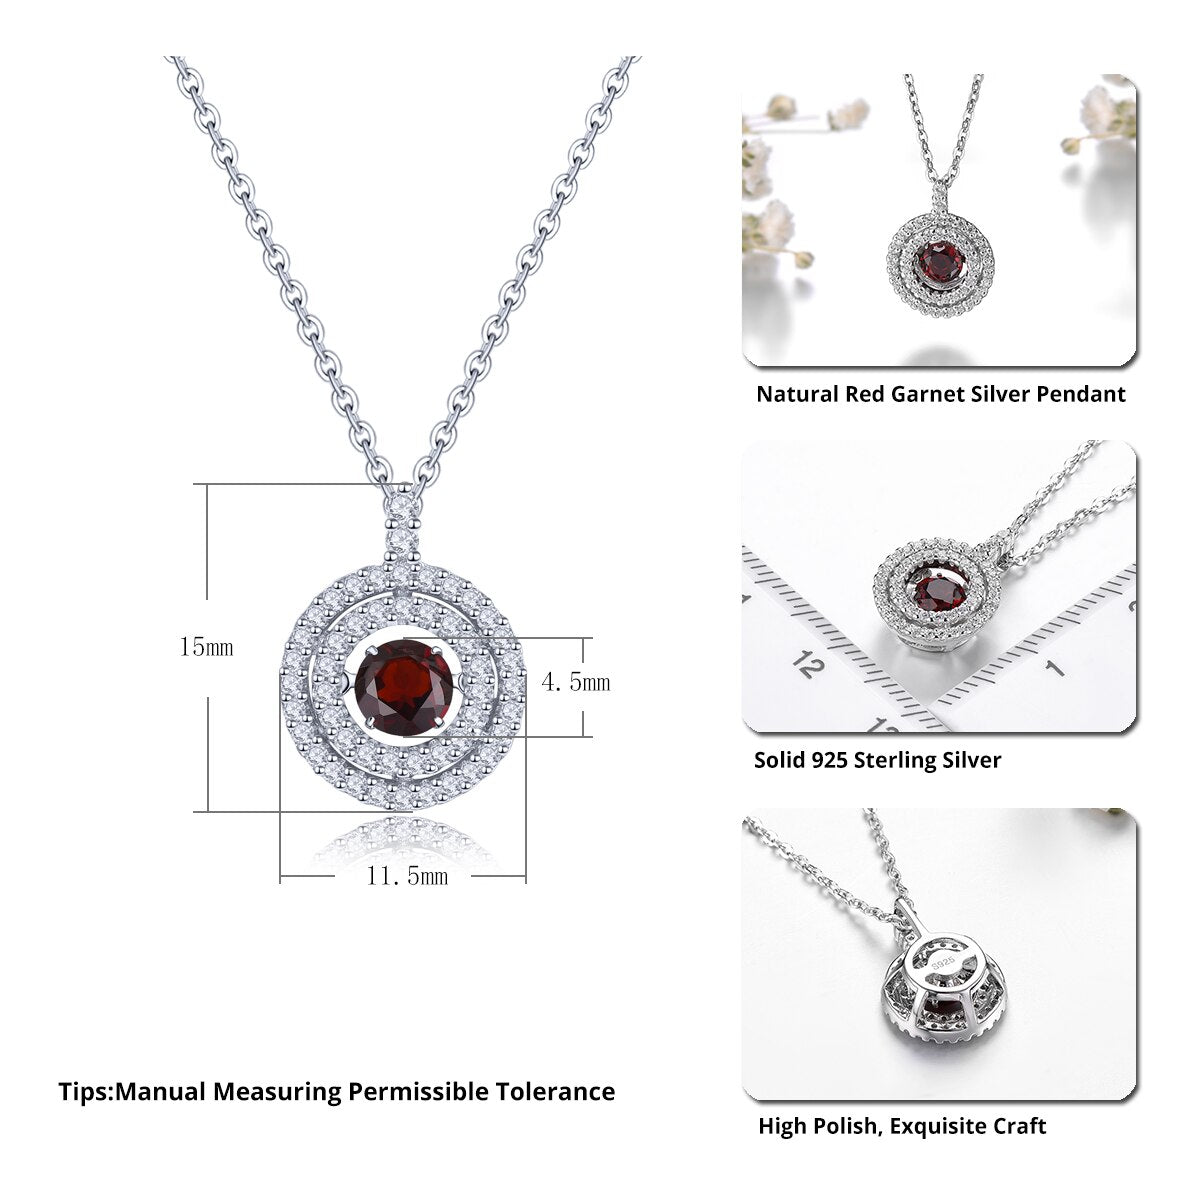 Natural Red Garnet Sterling Silver Pendant Round 4.5mm Faced Cut Classic Style S925 Jewelry Mother's Day Gift